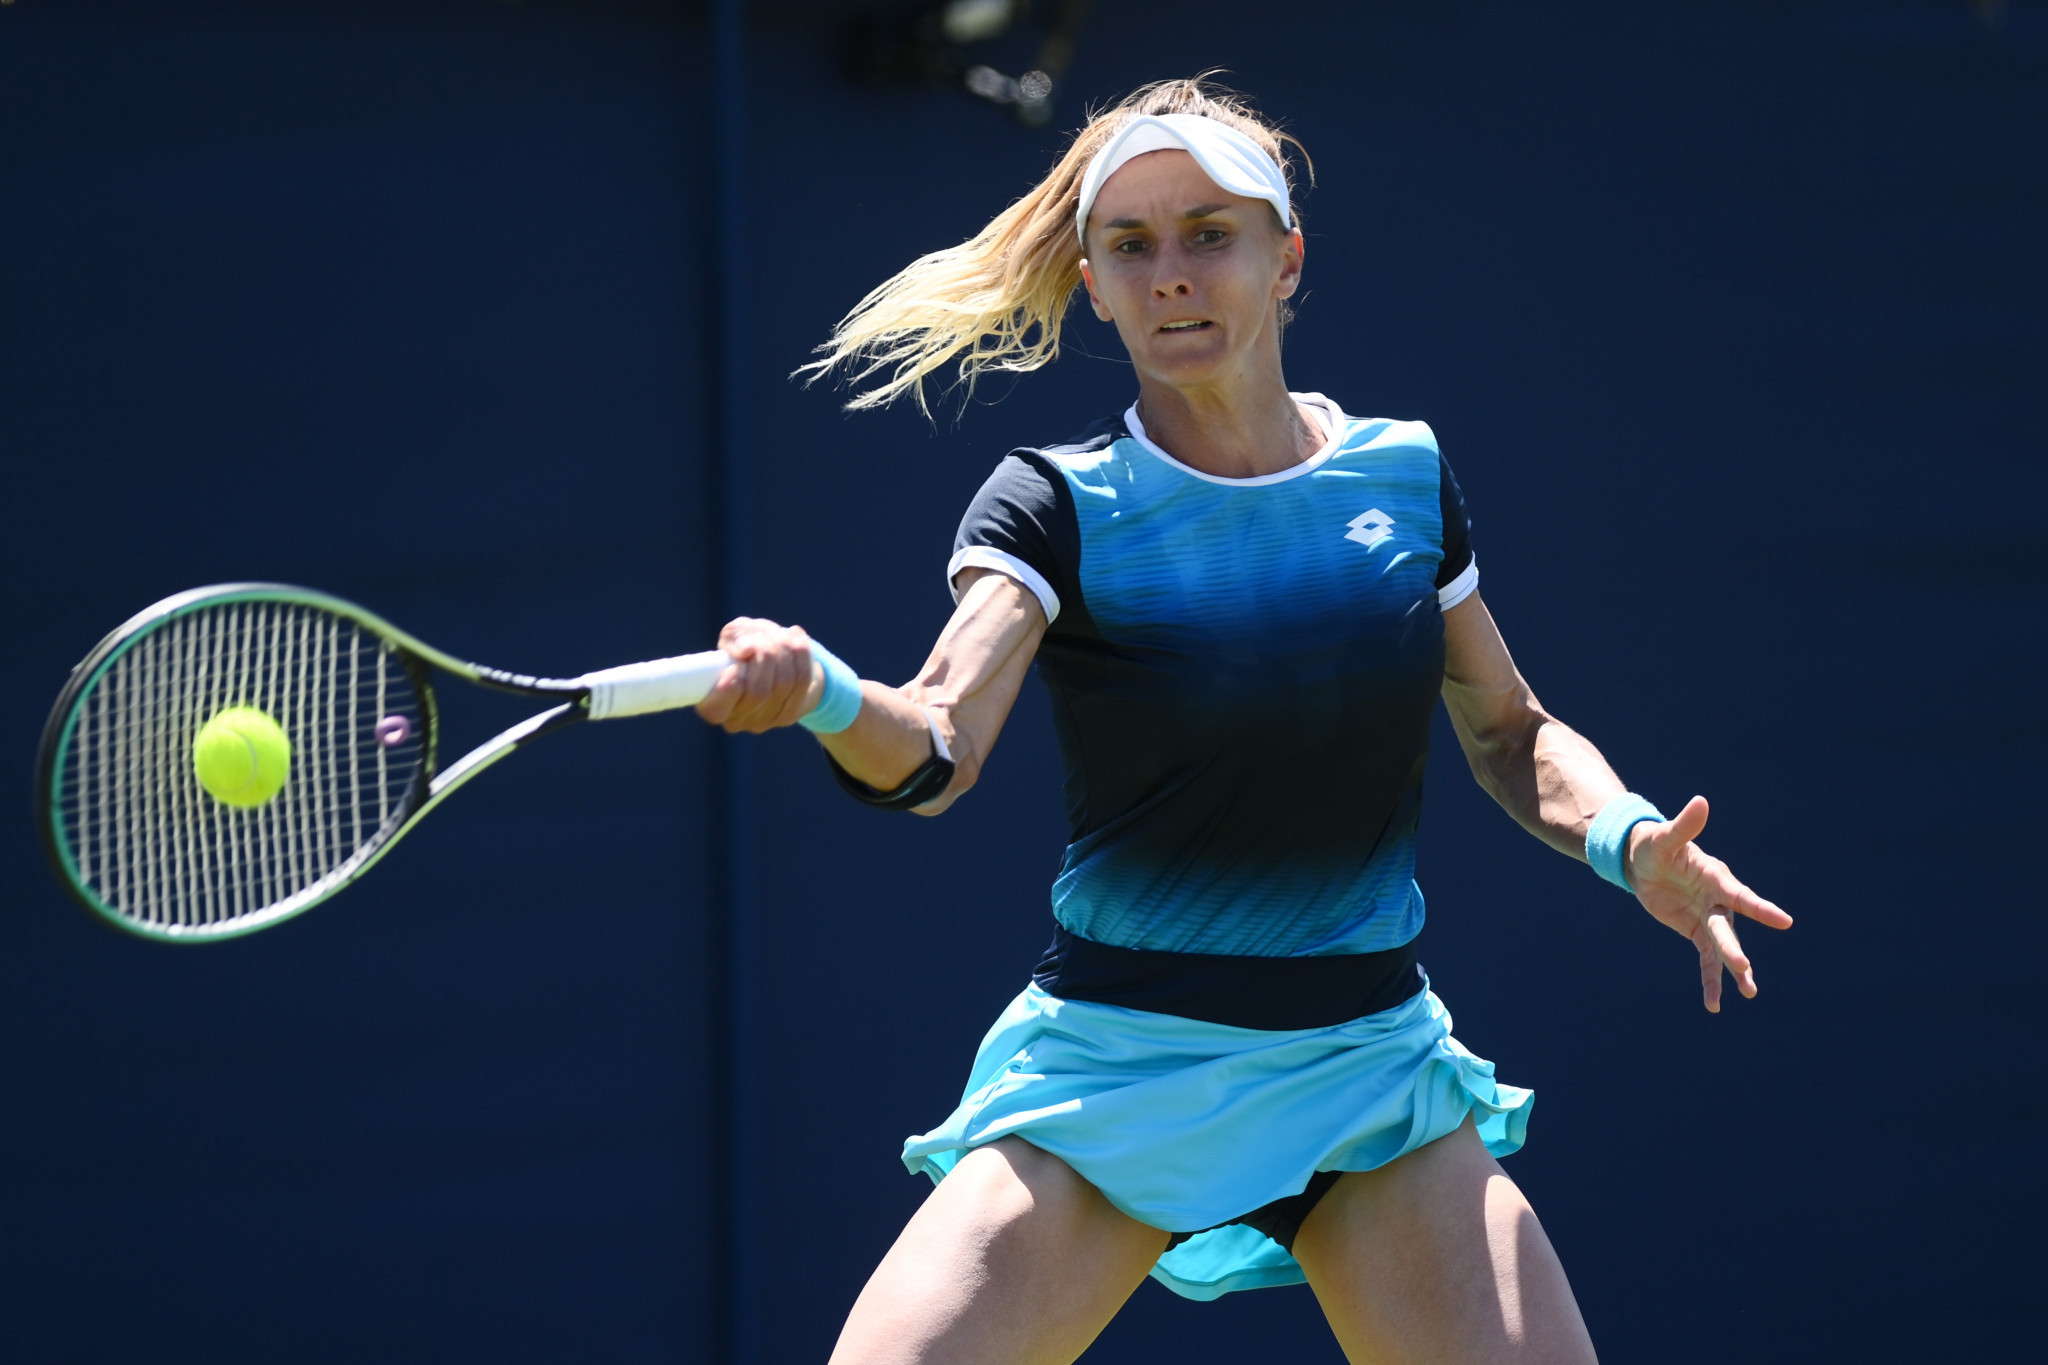 Ukraine's Lesia Tsurenko claimed  she withdrew from Indian Wells following conversation with WTA chief executive Steve Simon had left her 